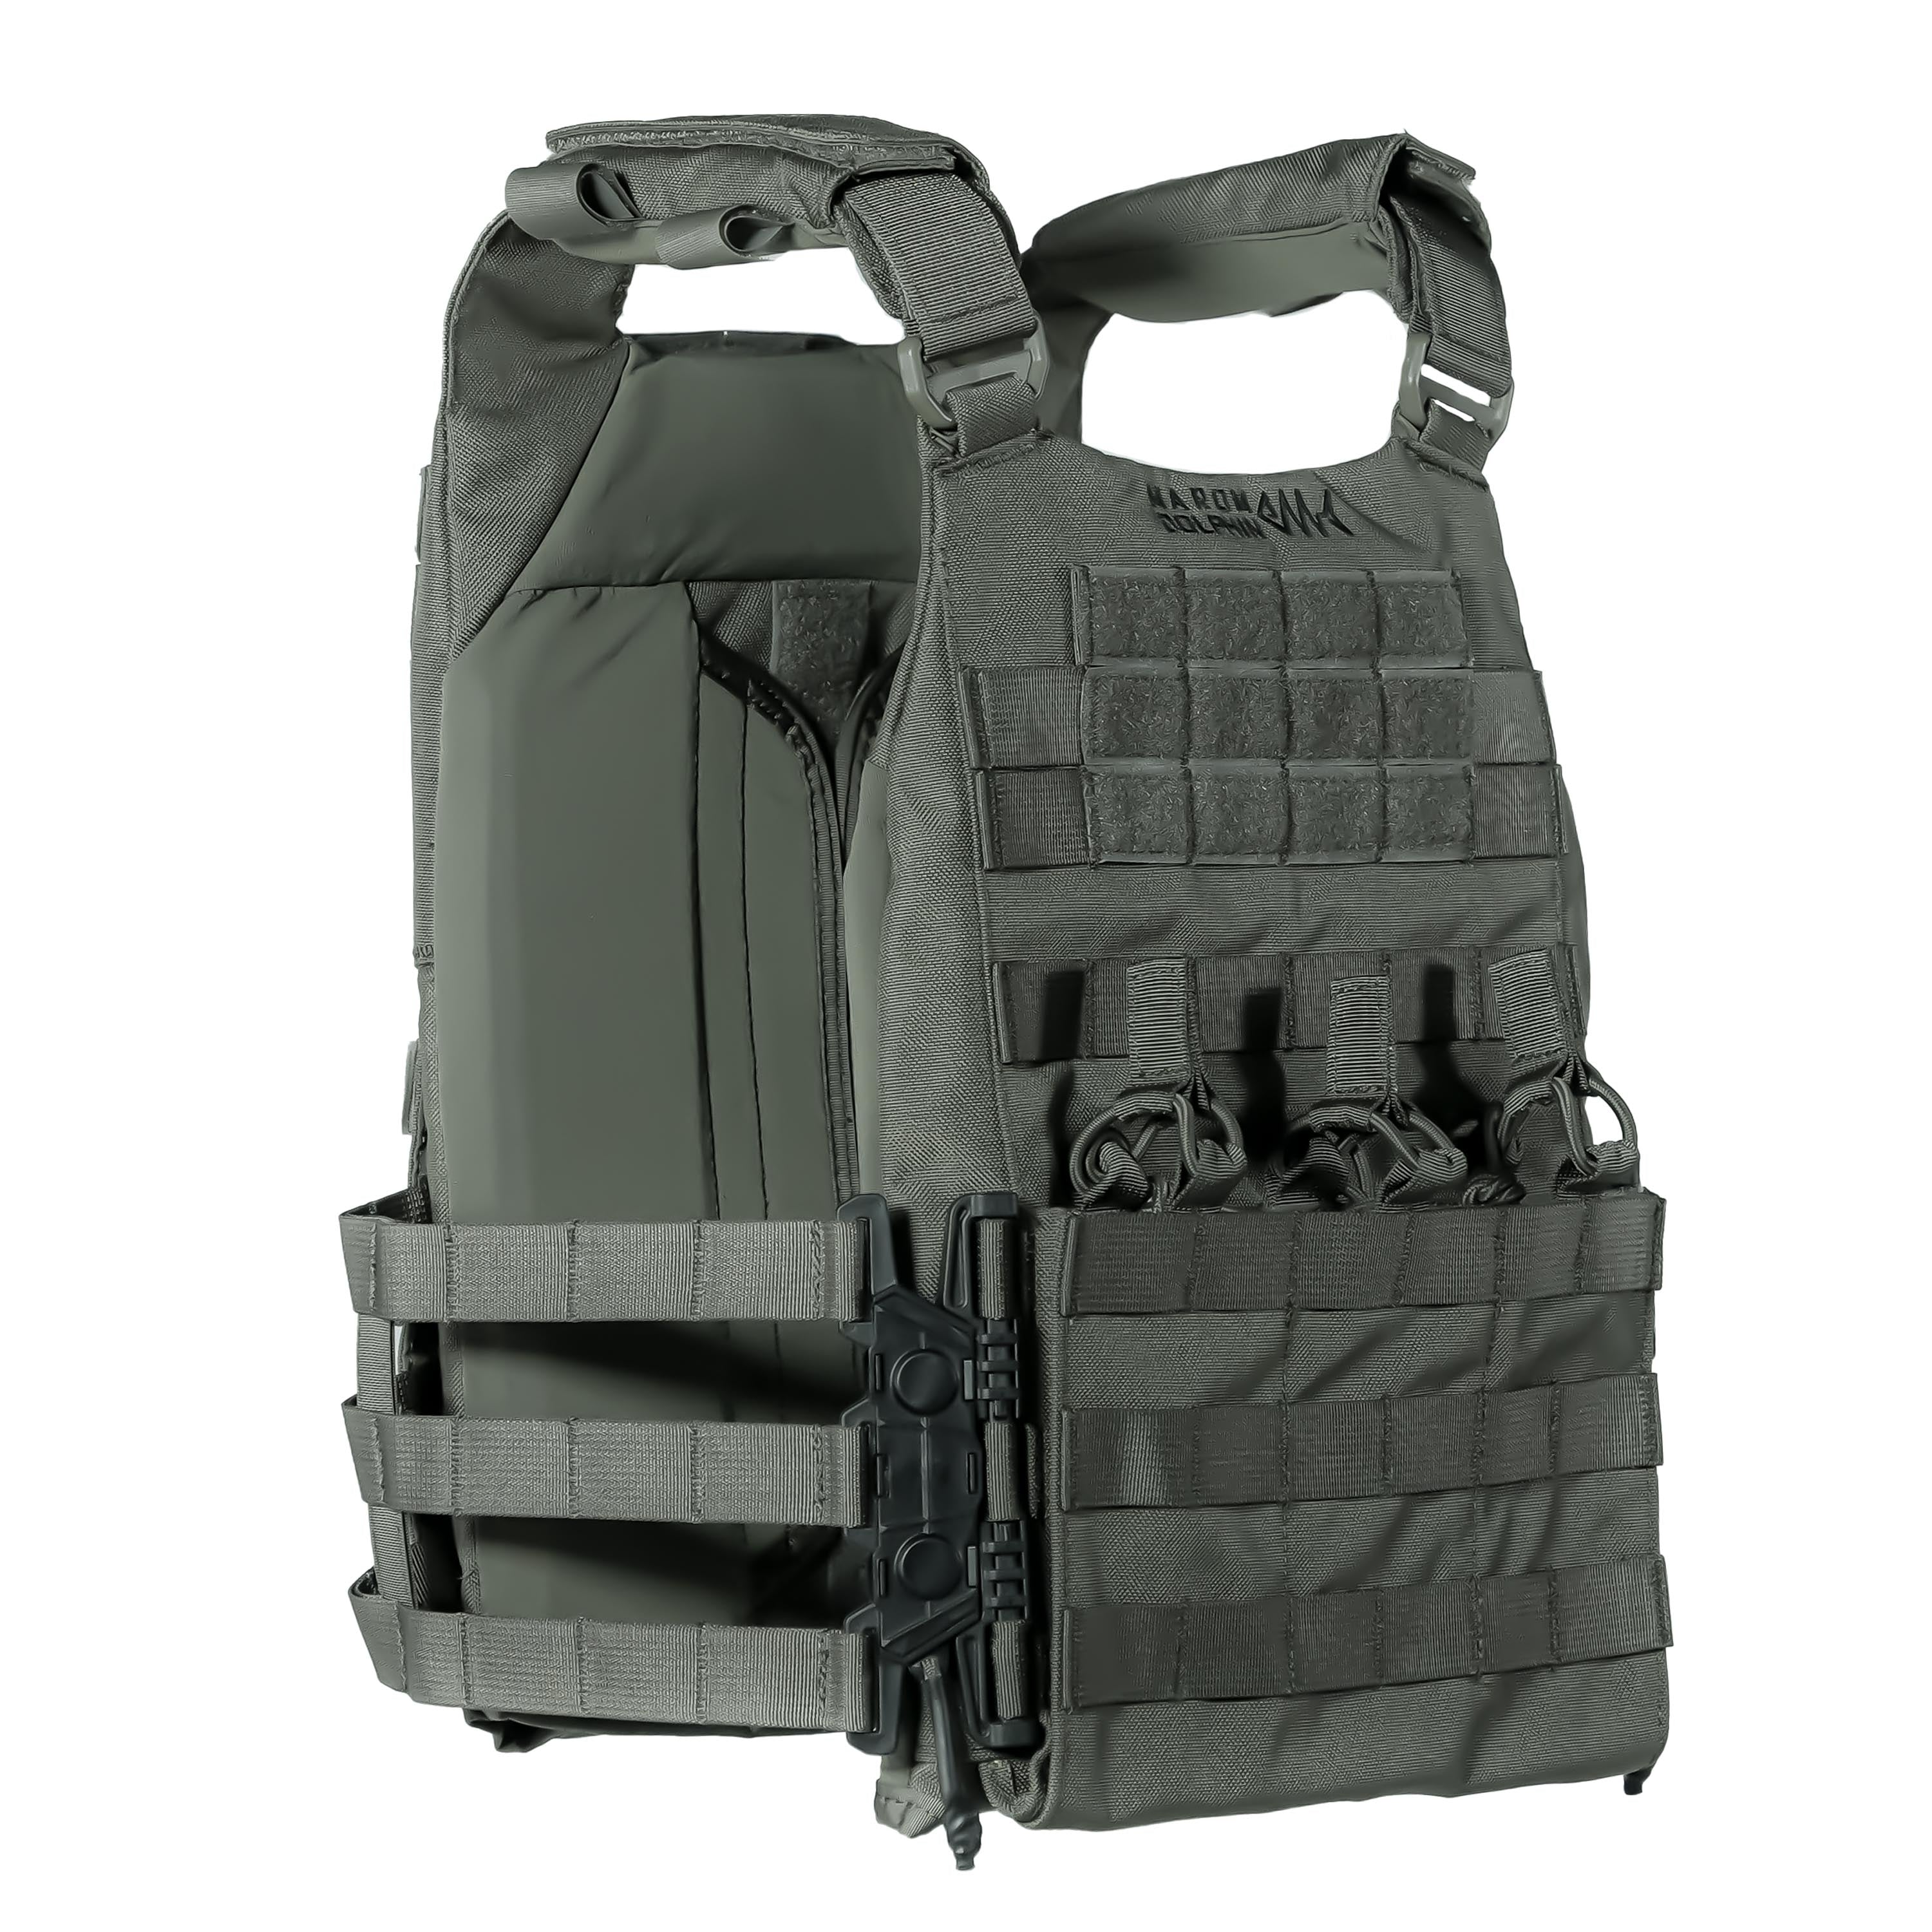 Marom Dolphin Vests and Plate Carriers